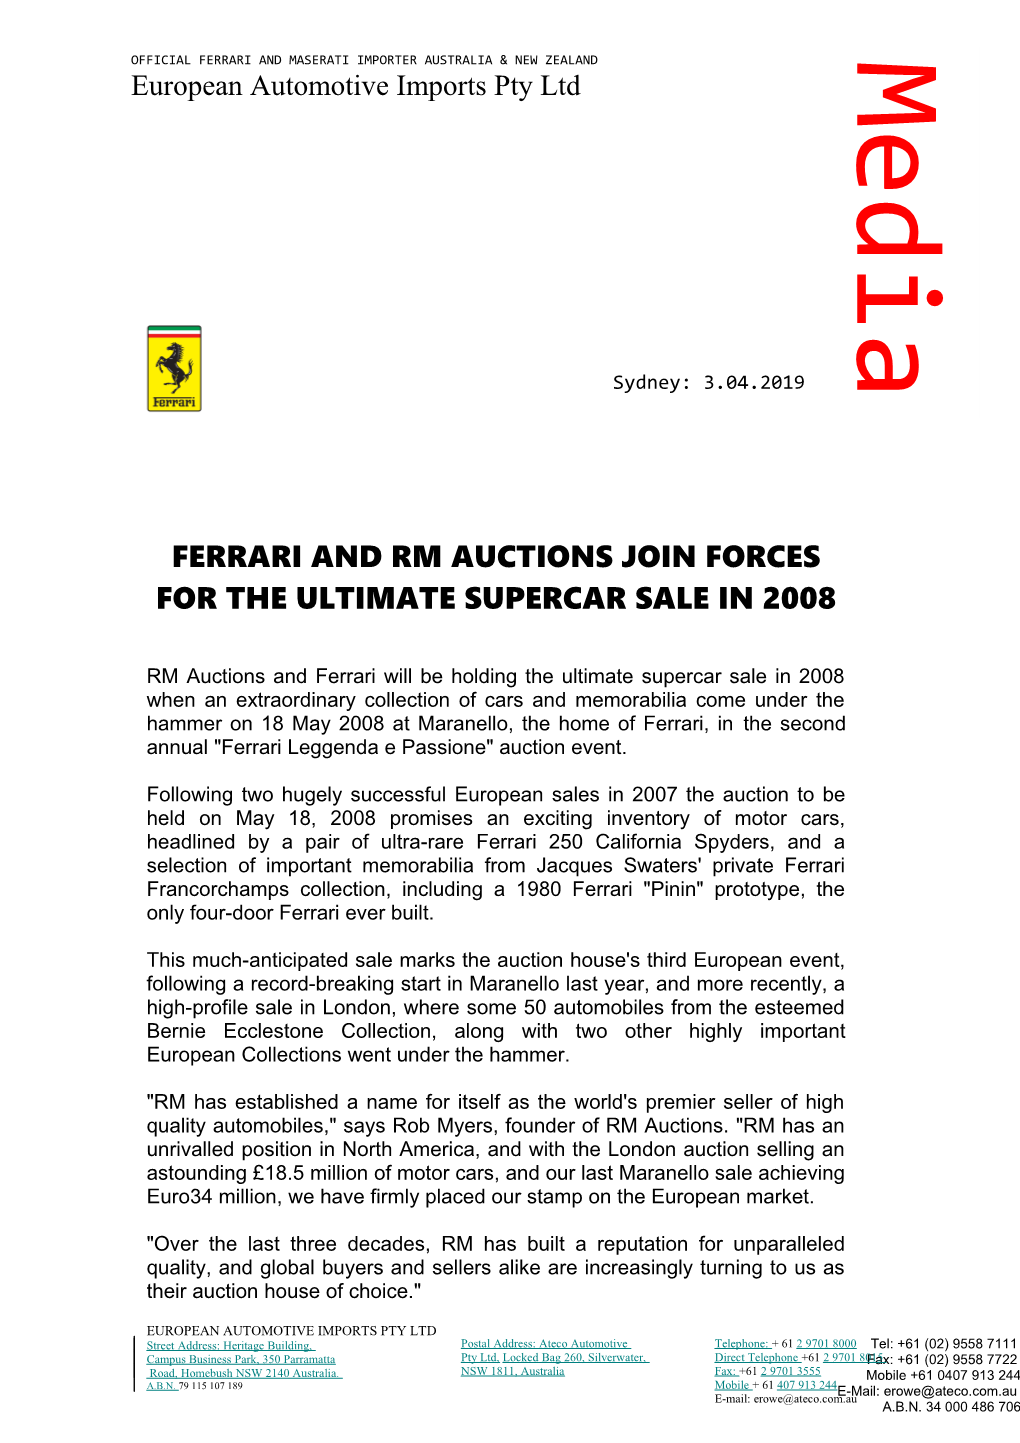 Ferrari and Rm Auctions Join Forces for the Ultimate Supercar Sale in 2008